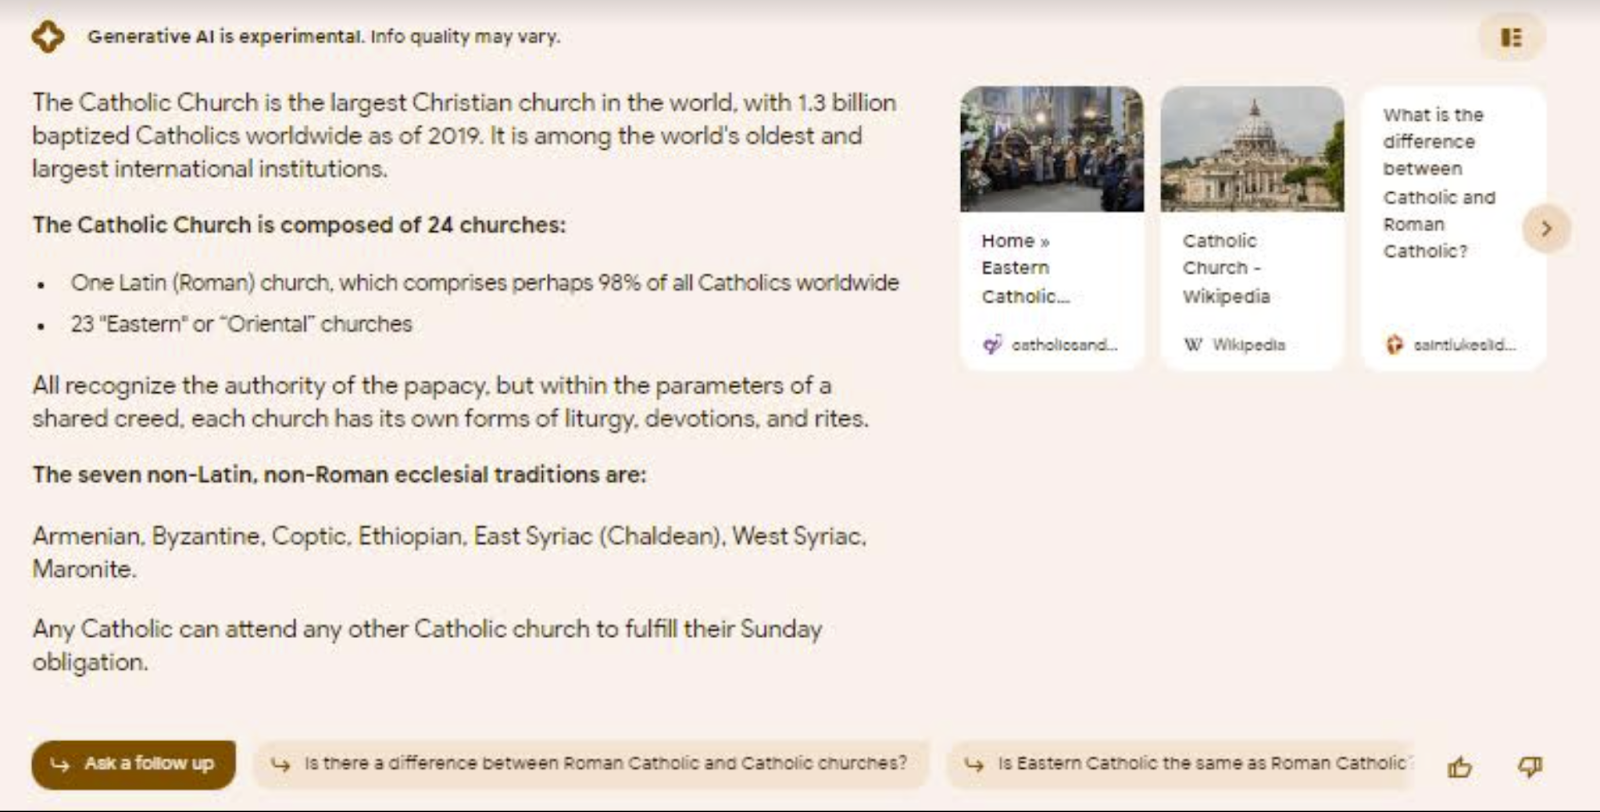 SGE result showing a lot of generic information about the Catholic church plus a carousel of links for more information and buttons to prompt the user to ask more questions